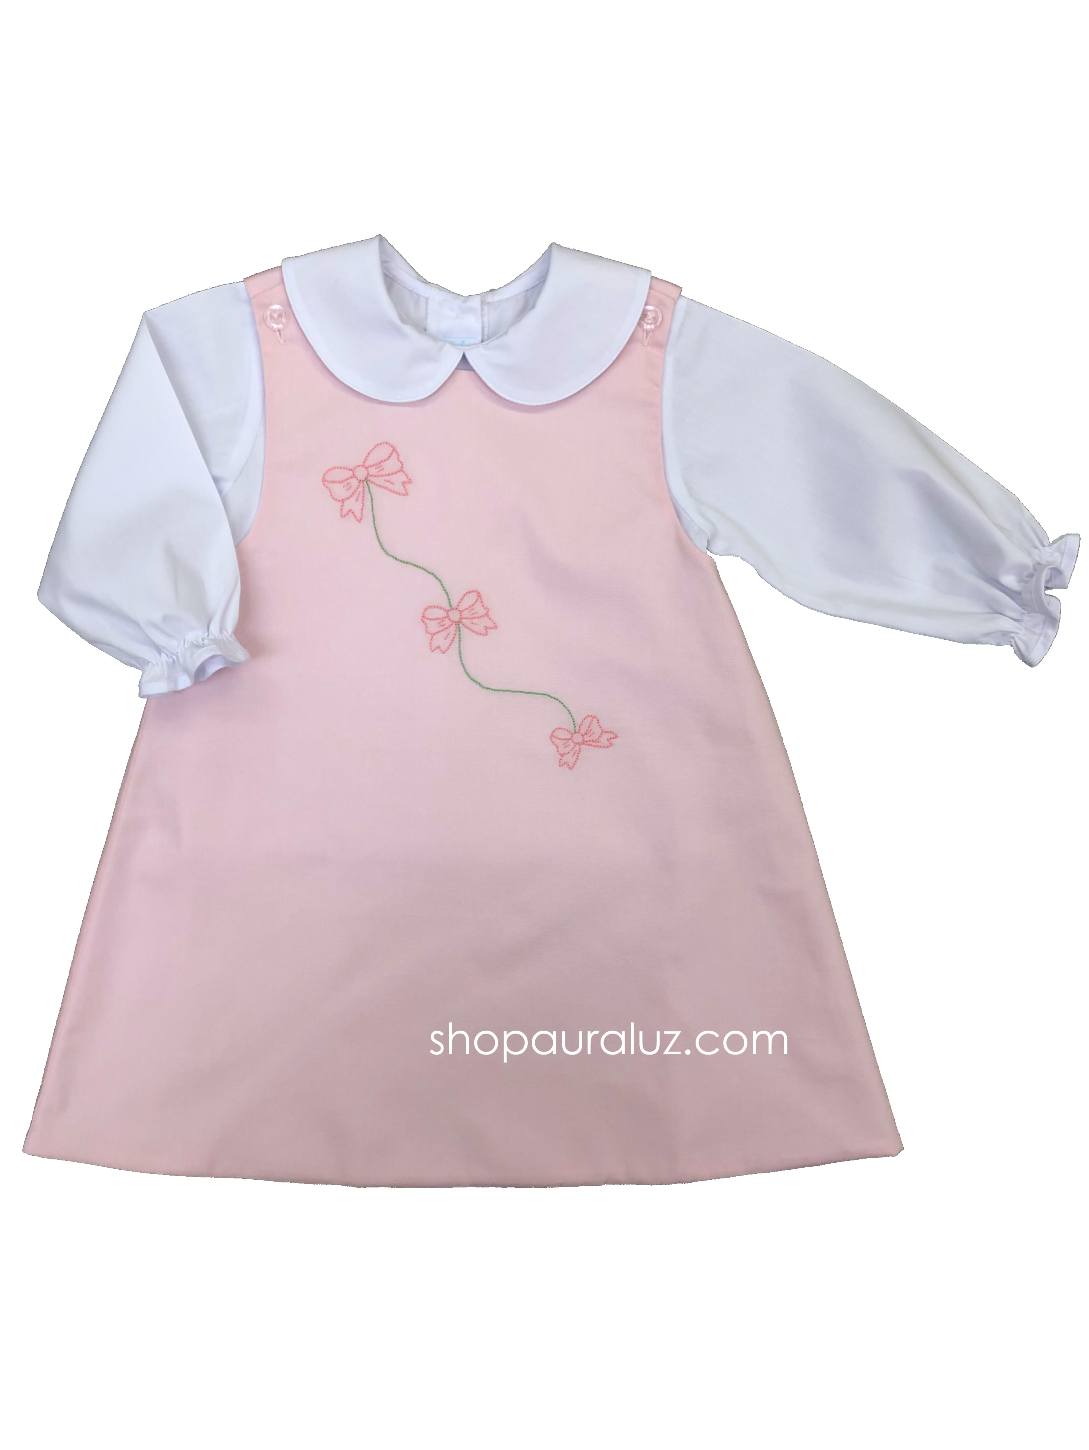 Auraluz Jumper/Blouse Set...Pink with embroidered bows